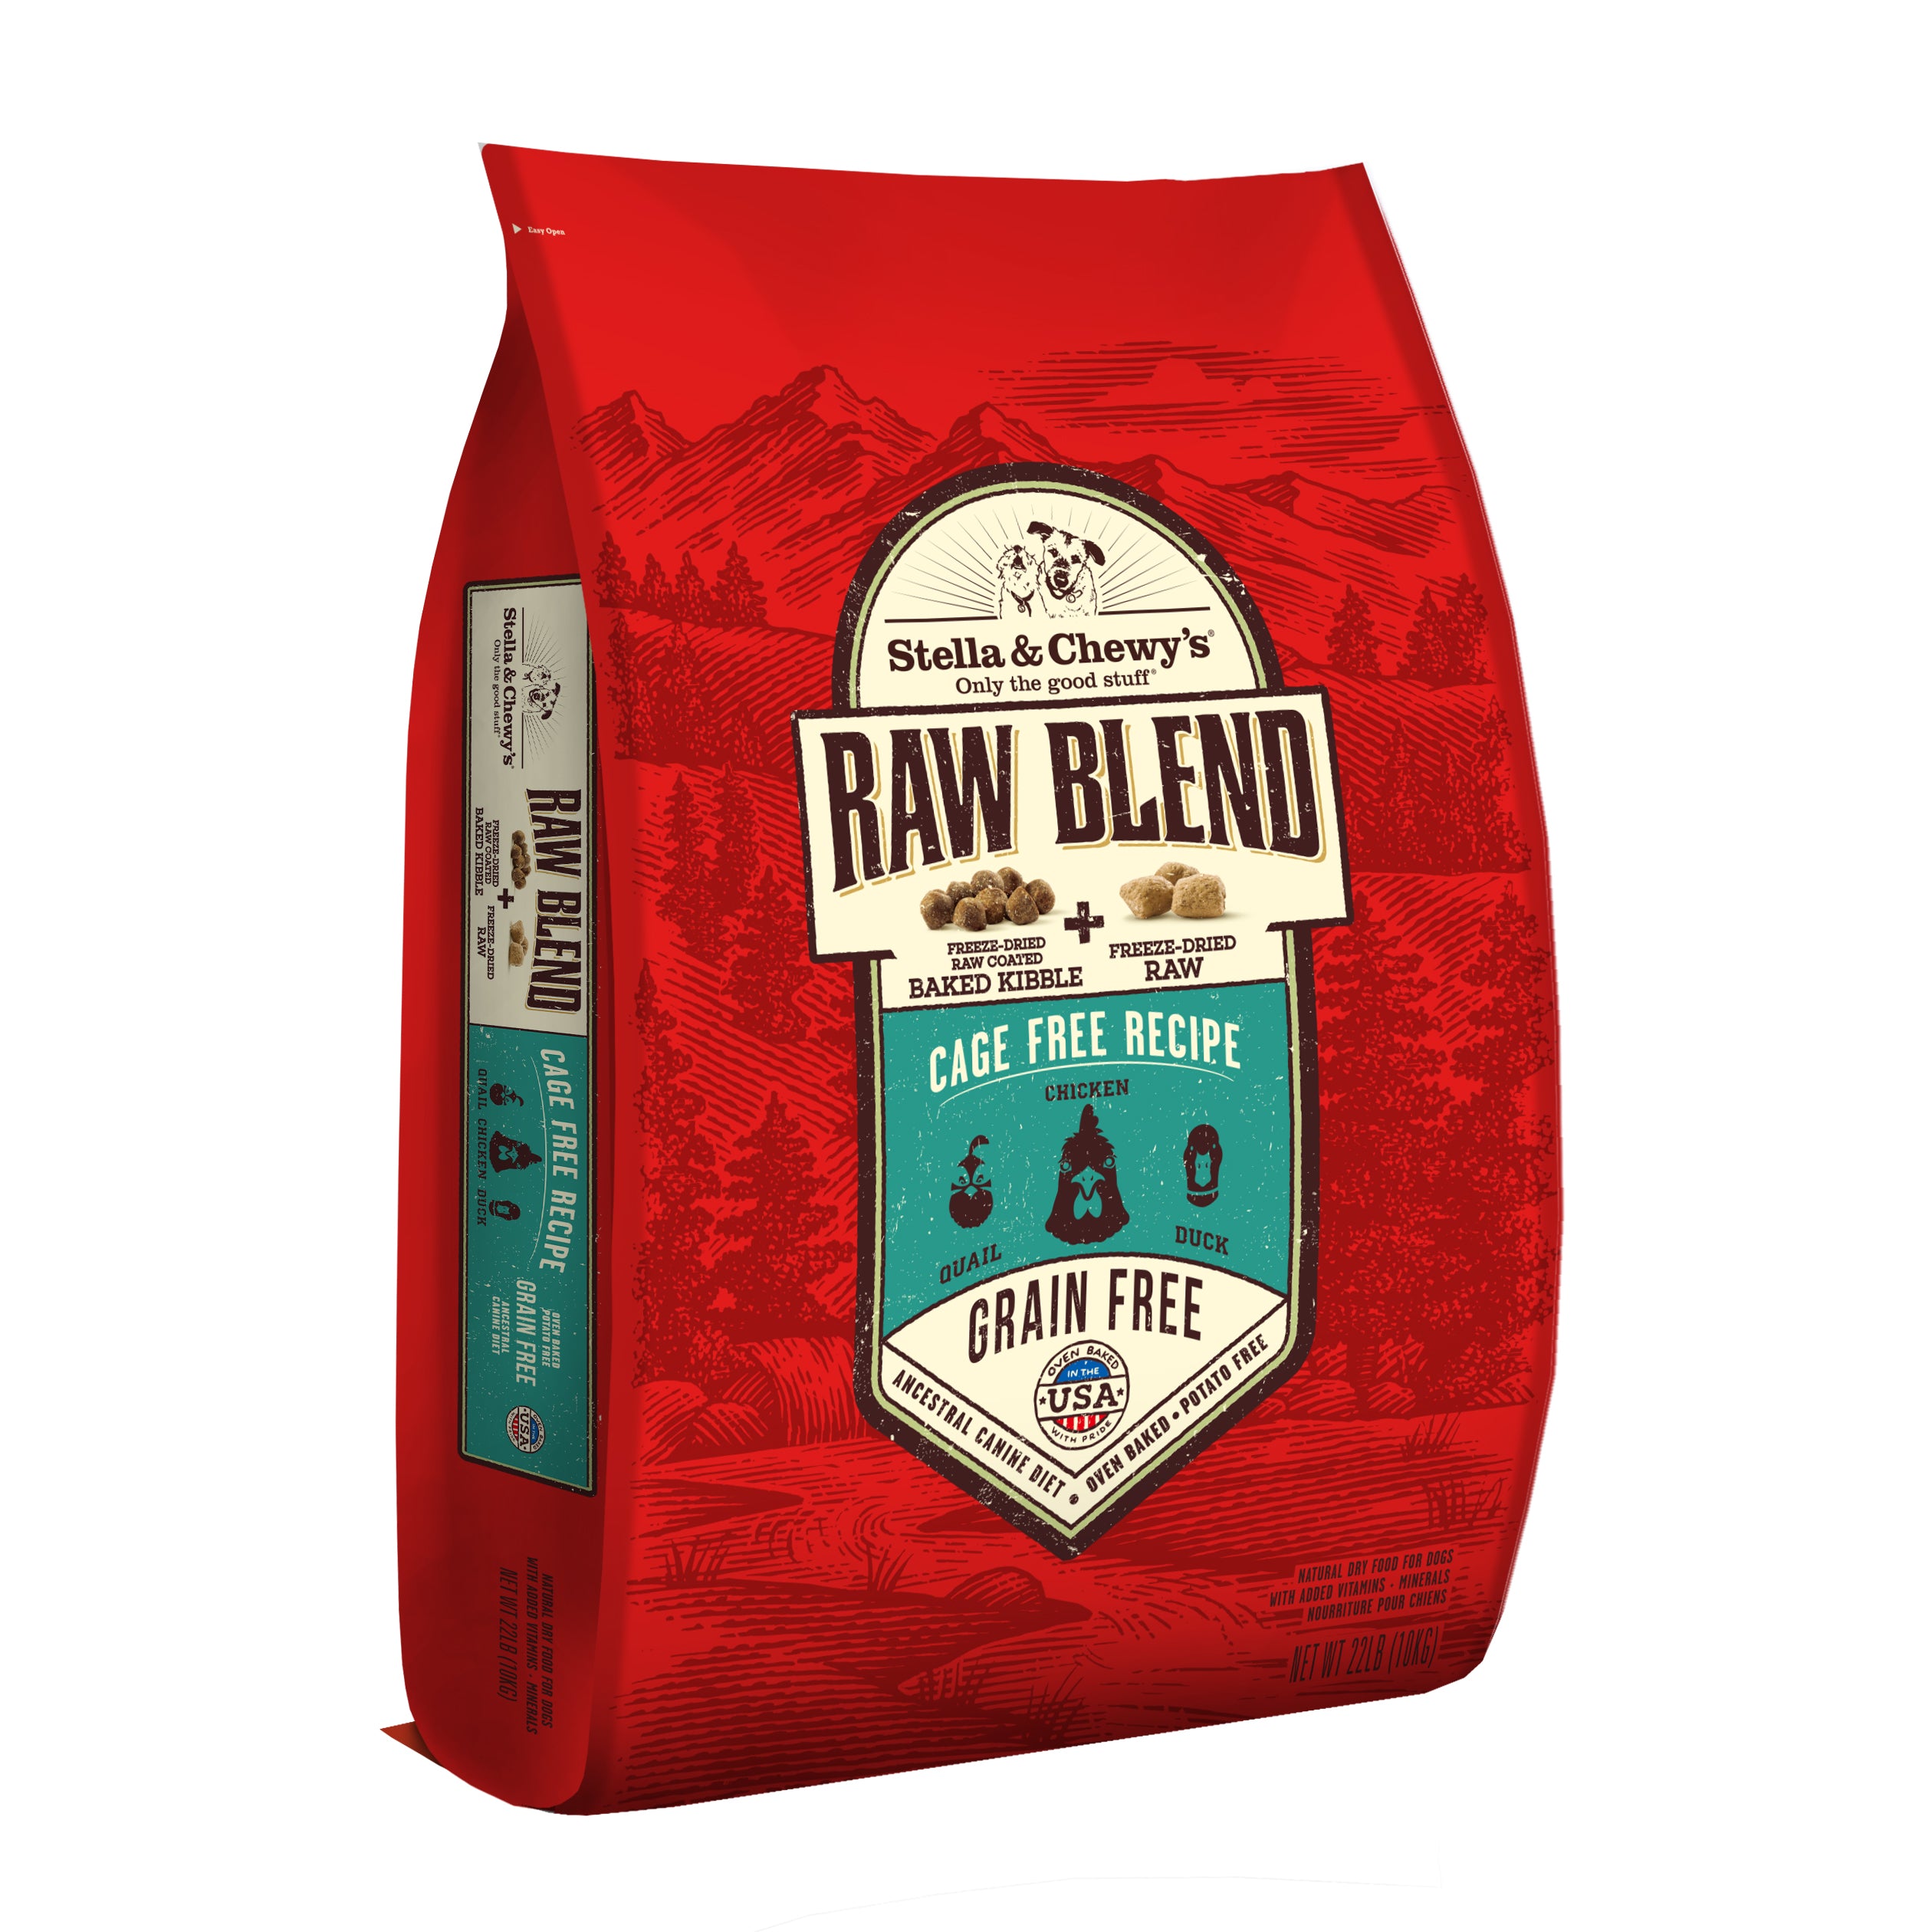 Stella & Chewy's Raw Blend Cage Free Dry Dog Food